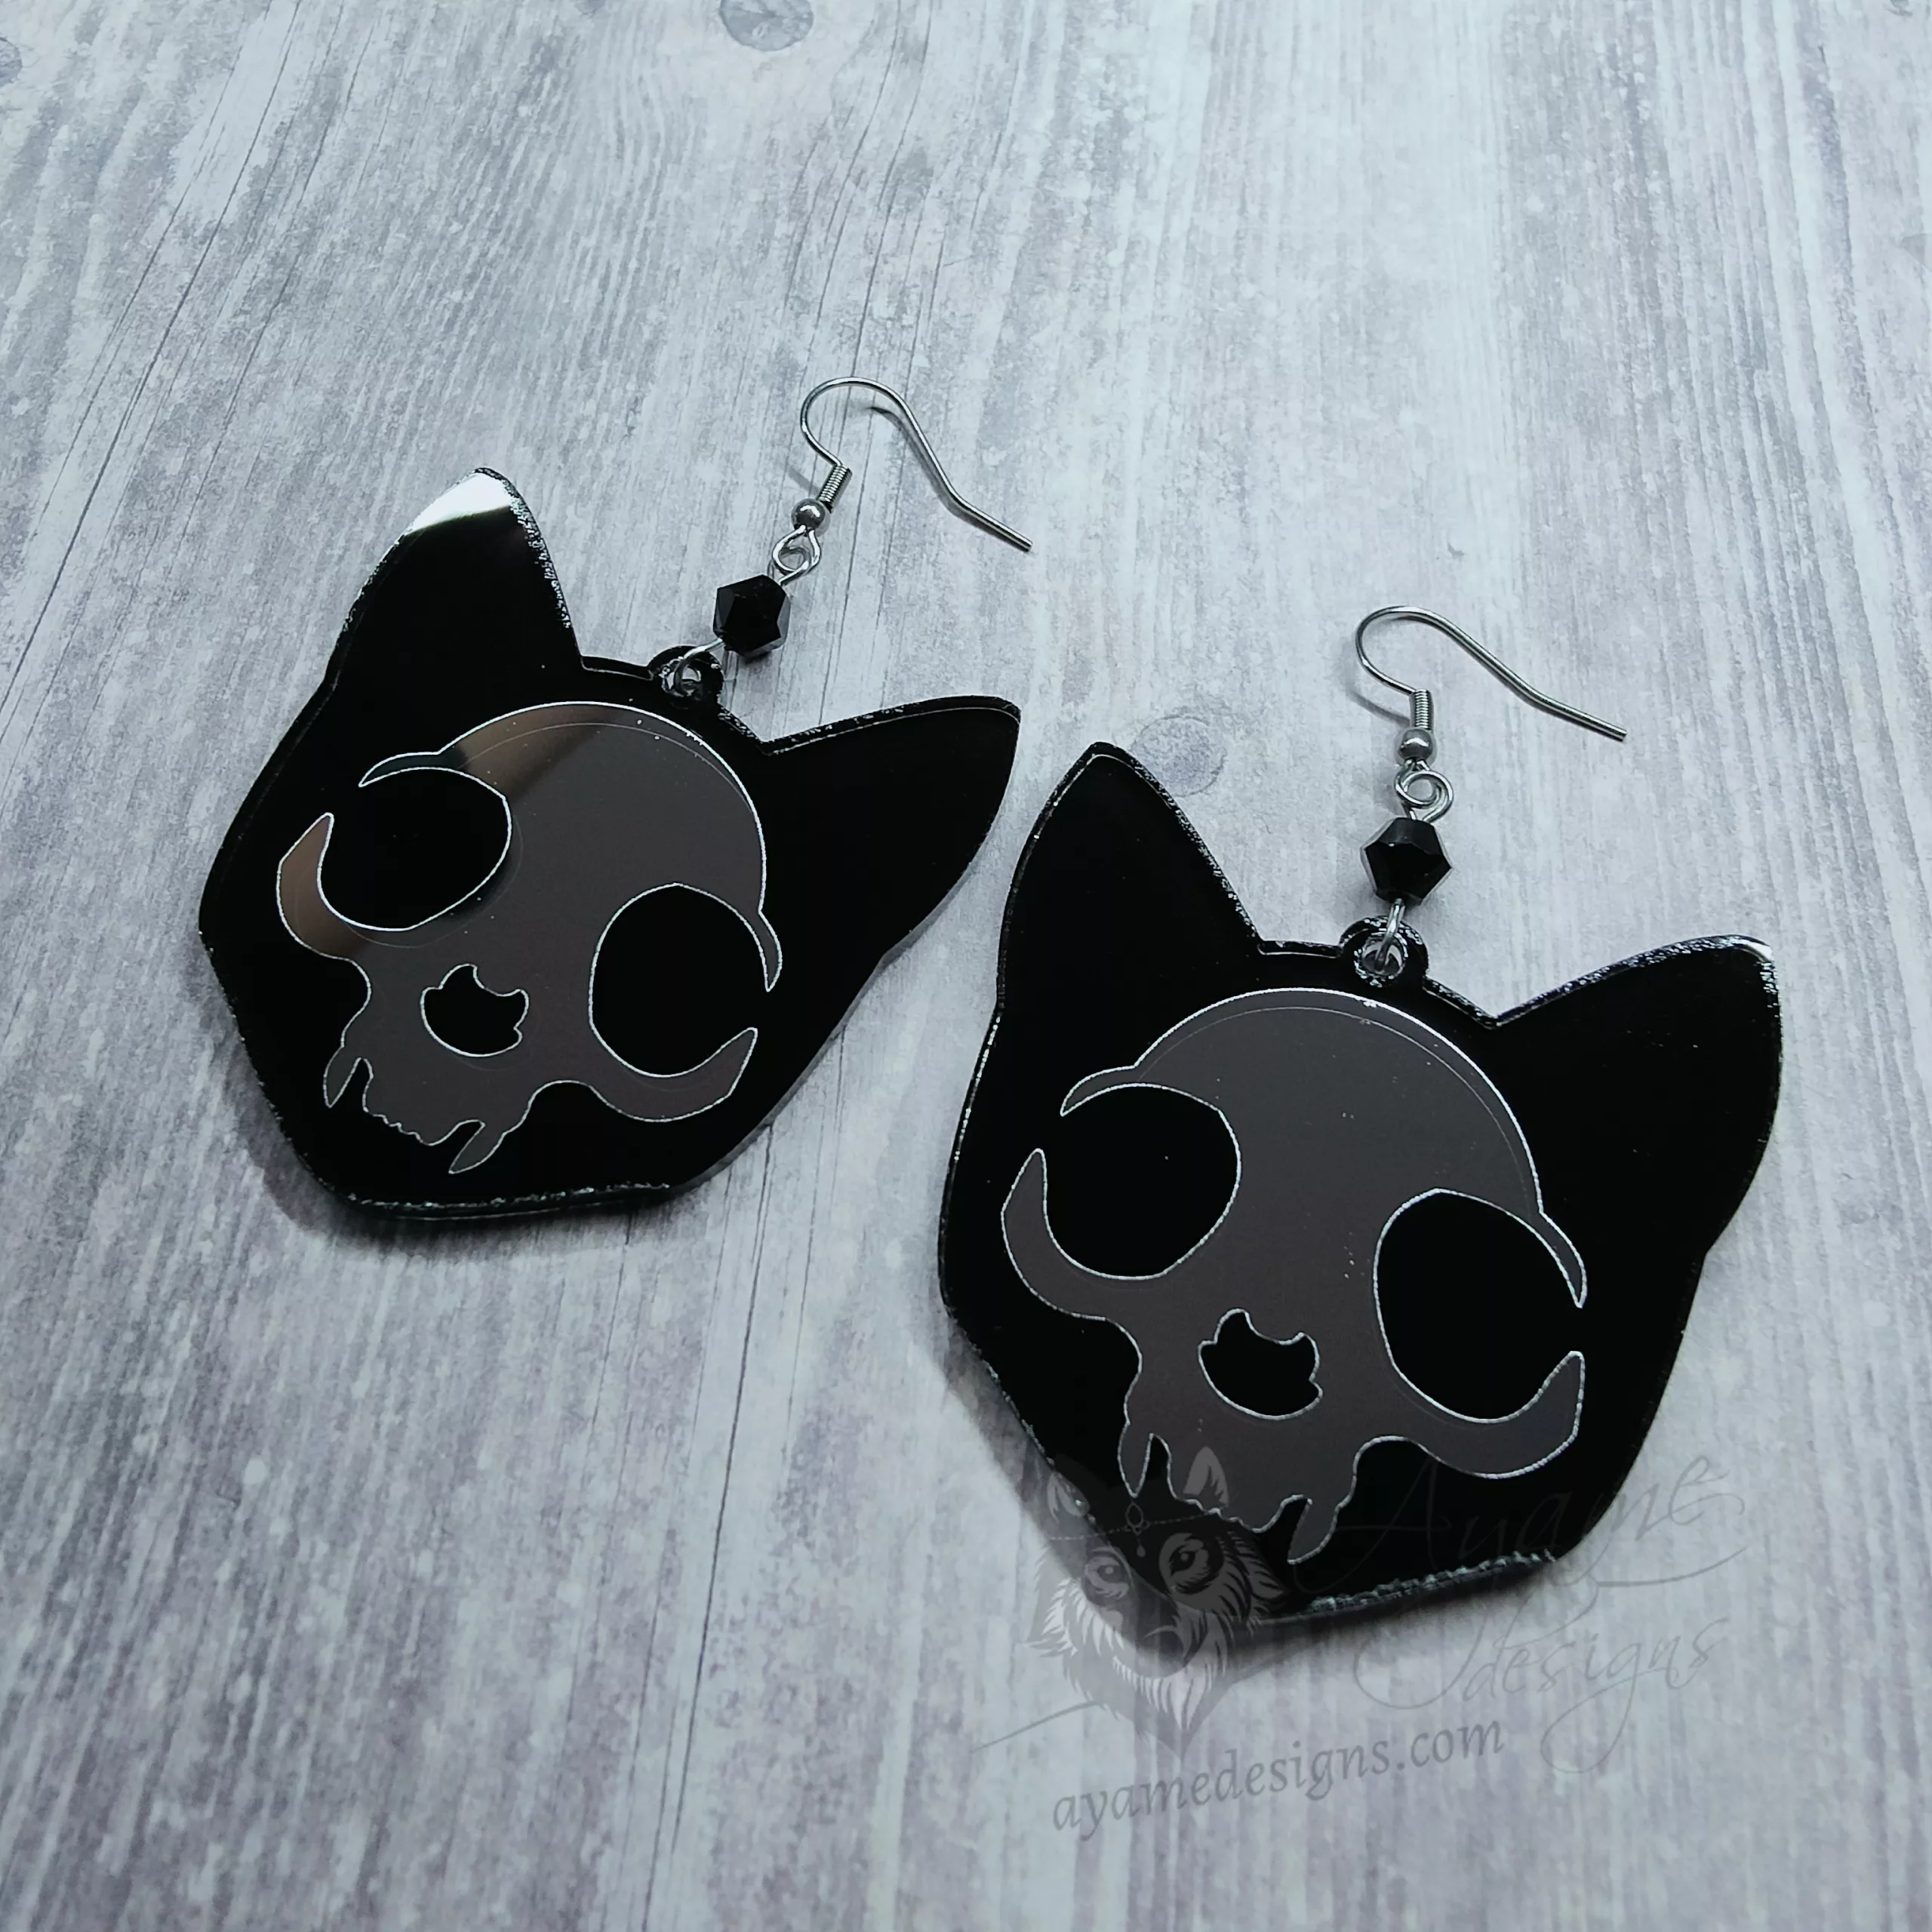 Handmade gothic earrings with laser cut mirror and resin cat skull pendants and black Austrian crystal beads on stainless steel earring hooks